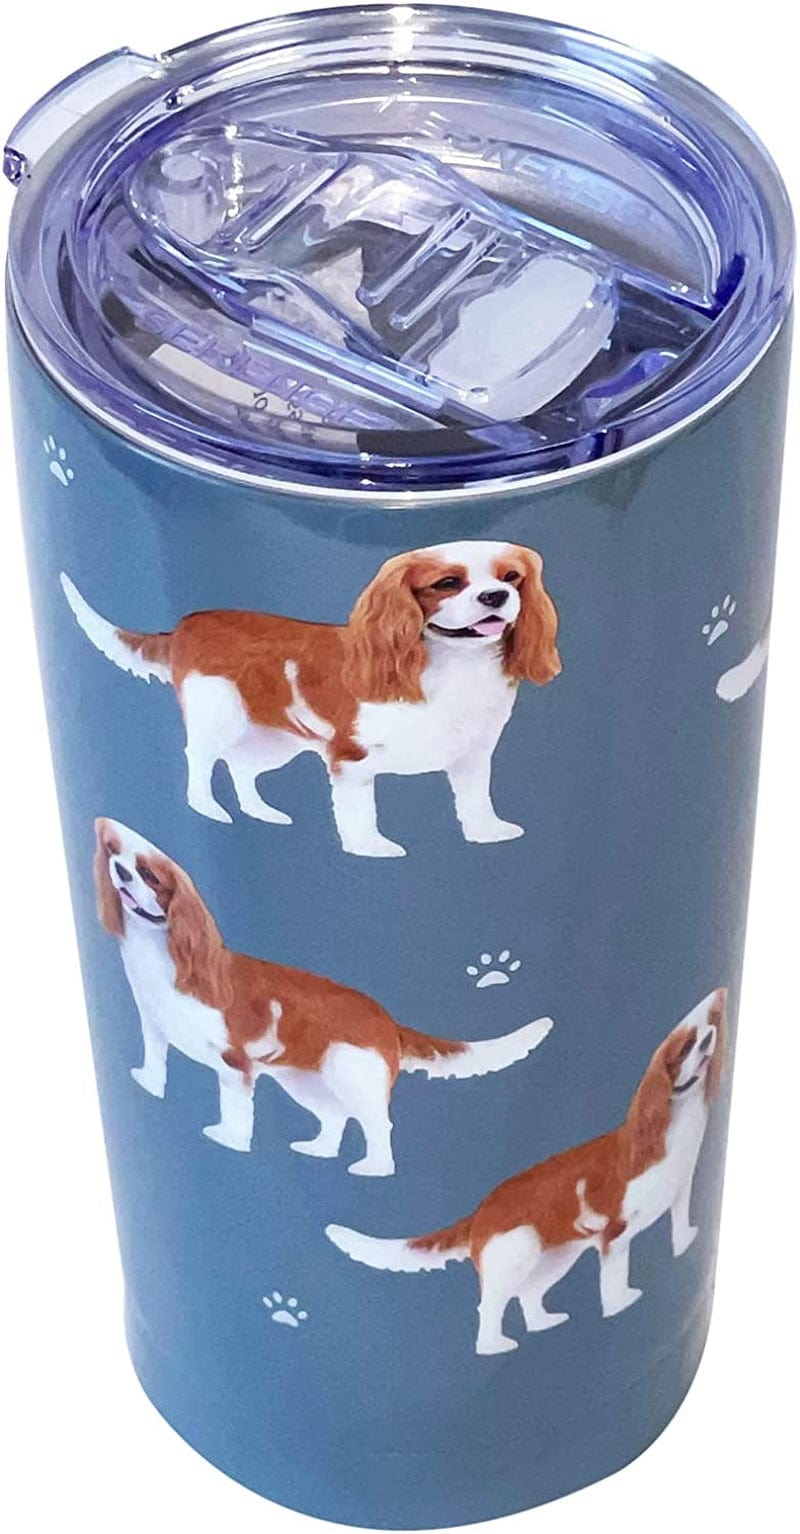 Australian Shepherd SERENGETI 16 Oz. Stainless Steel, Vacuum Insulated Tumbler with Spill Proof Lid - 3D Print - Insulated Travel Mug for Hot or Cold Drinks (Australian Shepherd Tumbler) Home & Garden > Kitchen & Dining > Tableware > Drinkware SERENGETI King Charles Cavalier Tumbler  